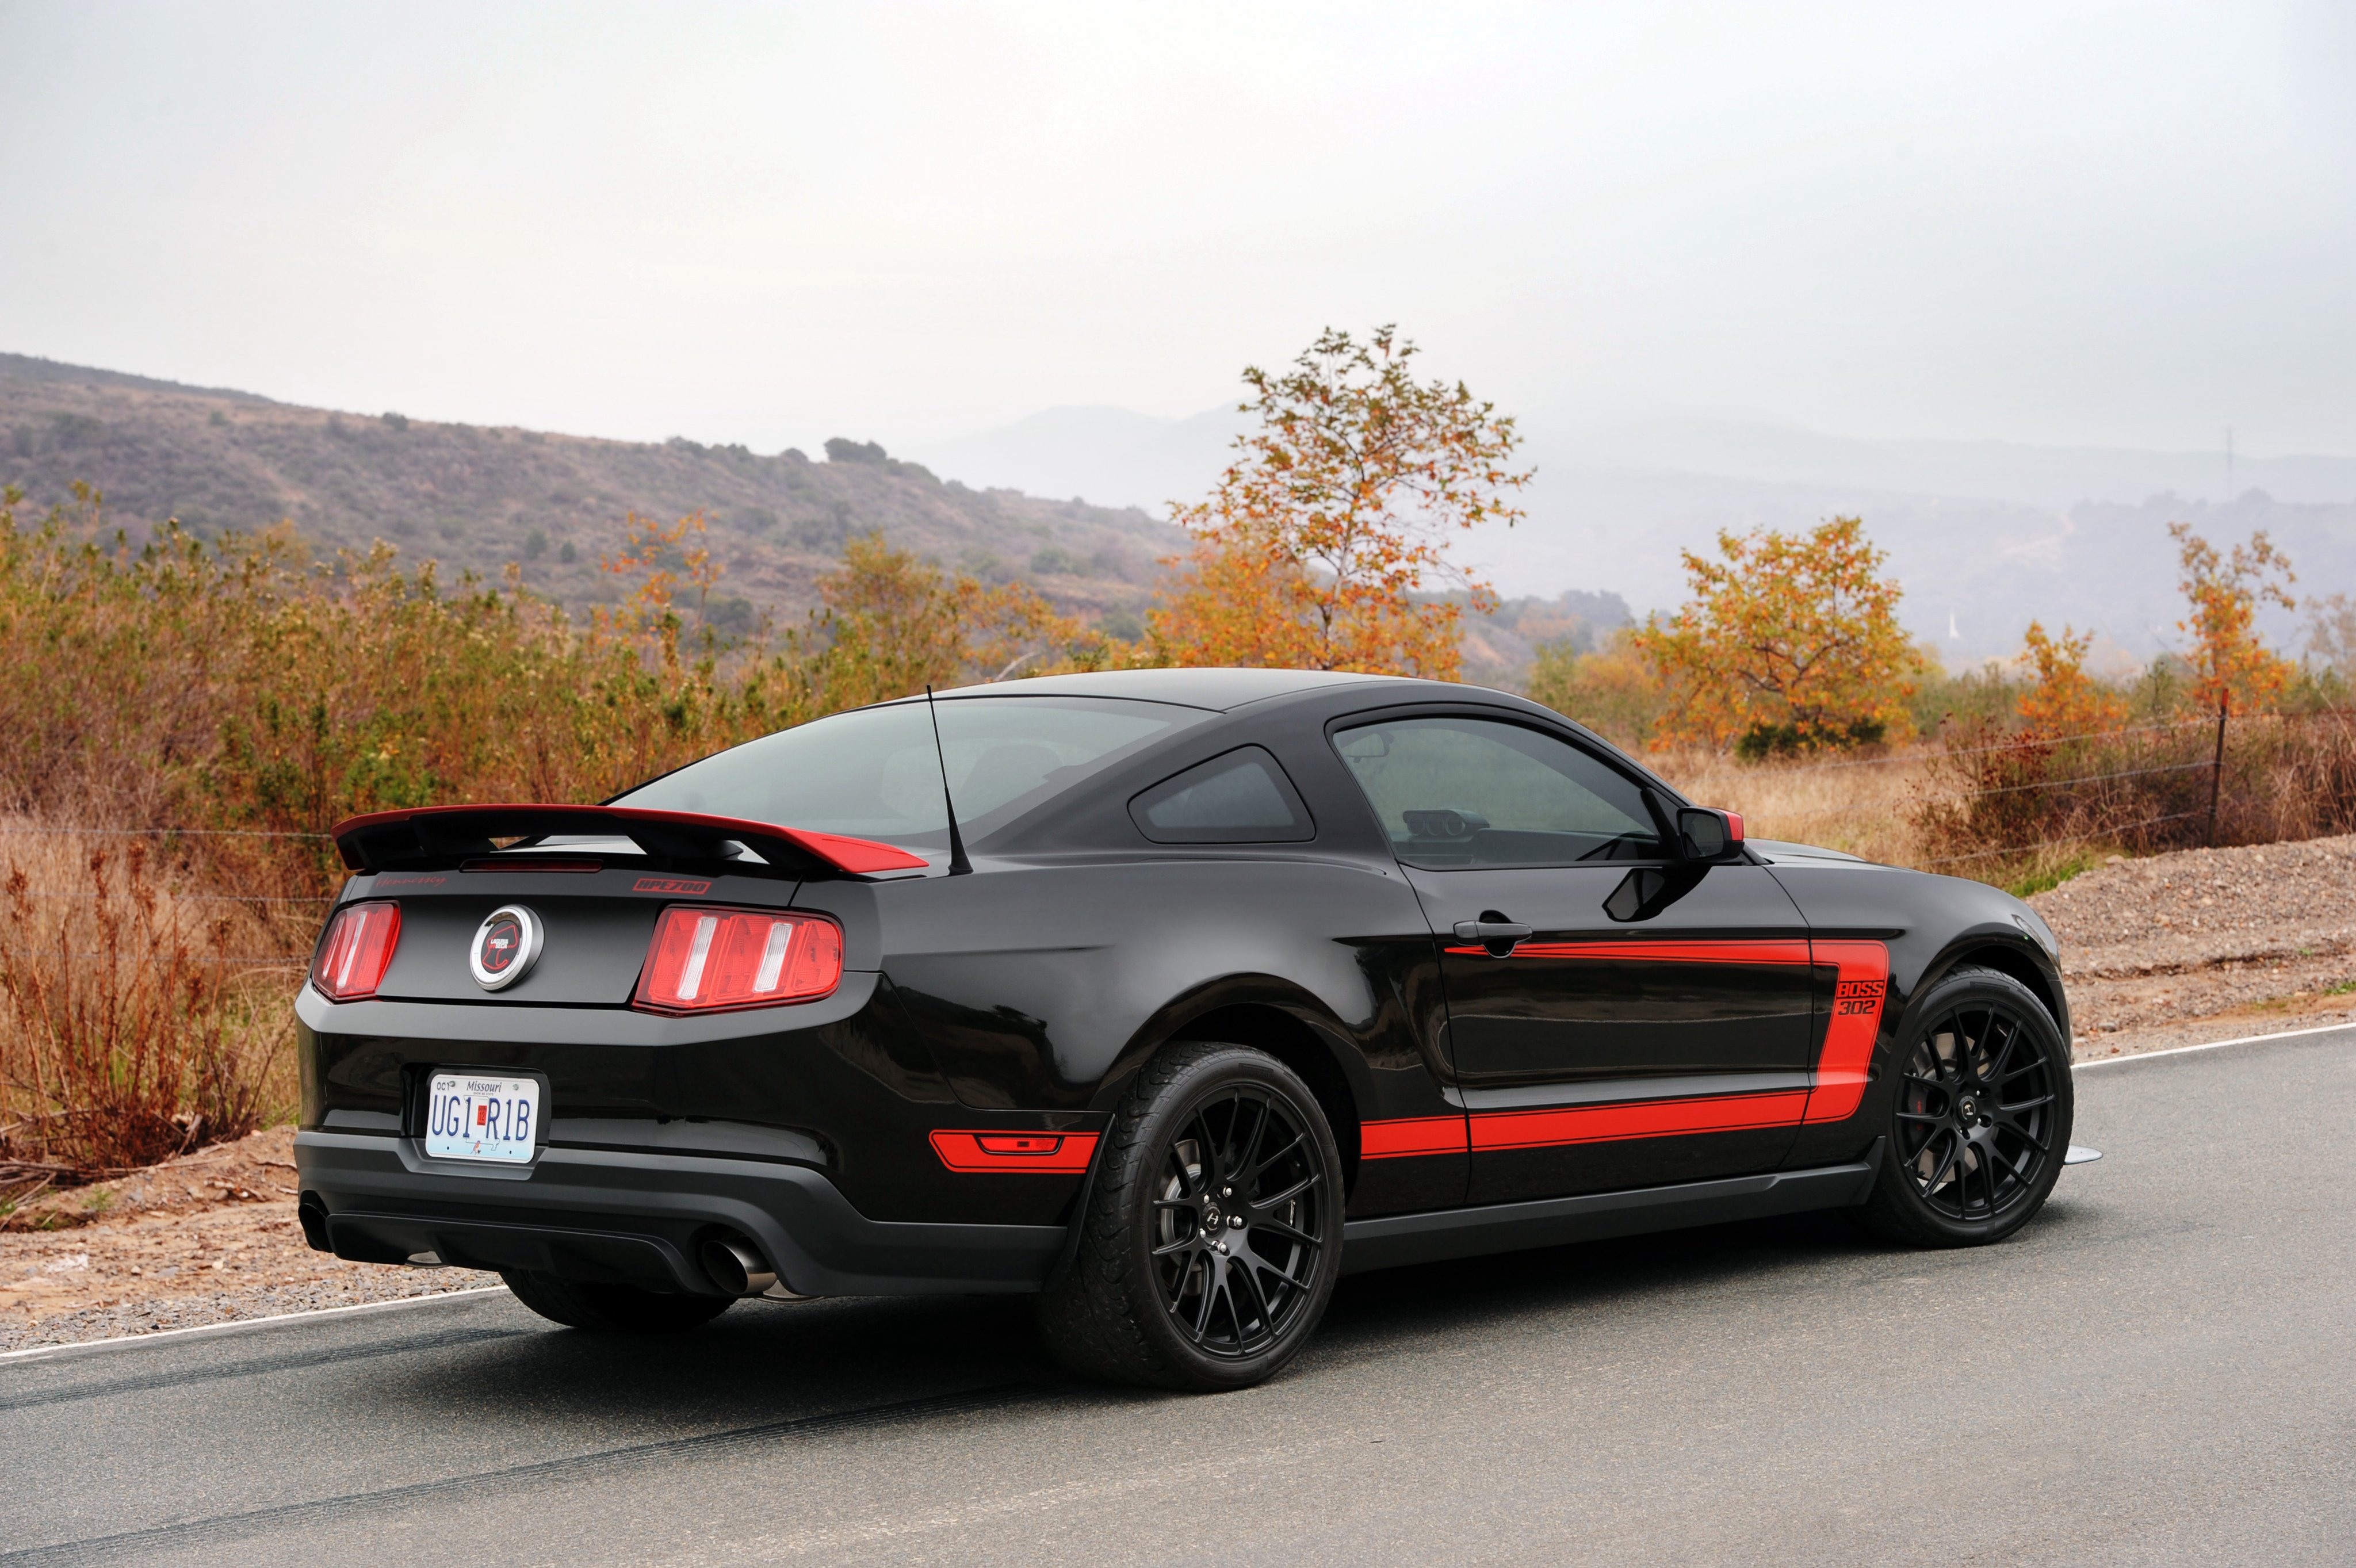 2012, Hennessey, Ford, Mustang, Boss, 3, 02hpe700, Muscle Wallpaper